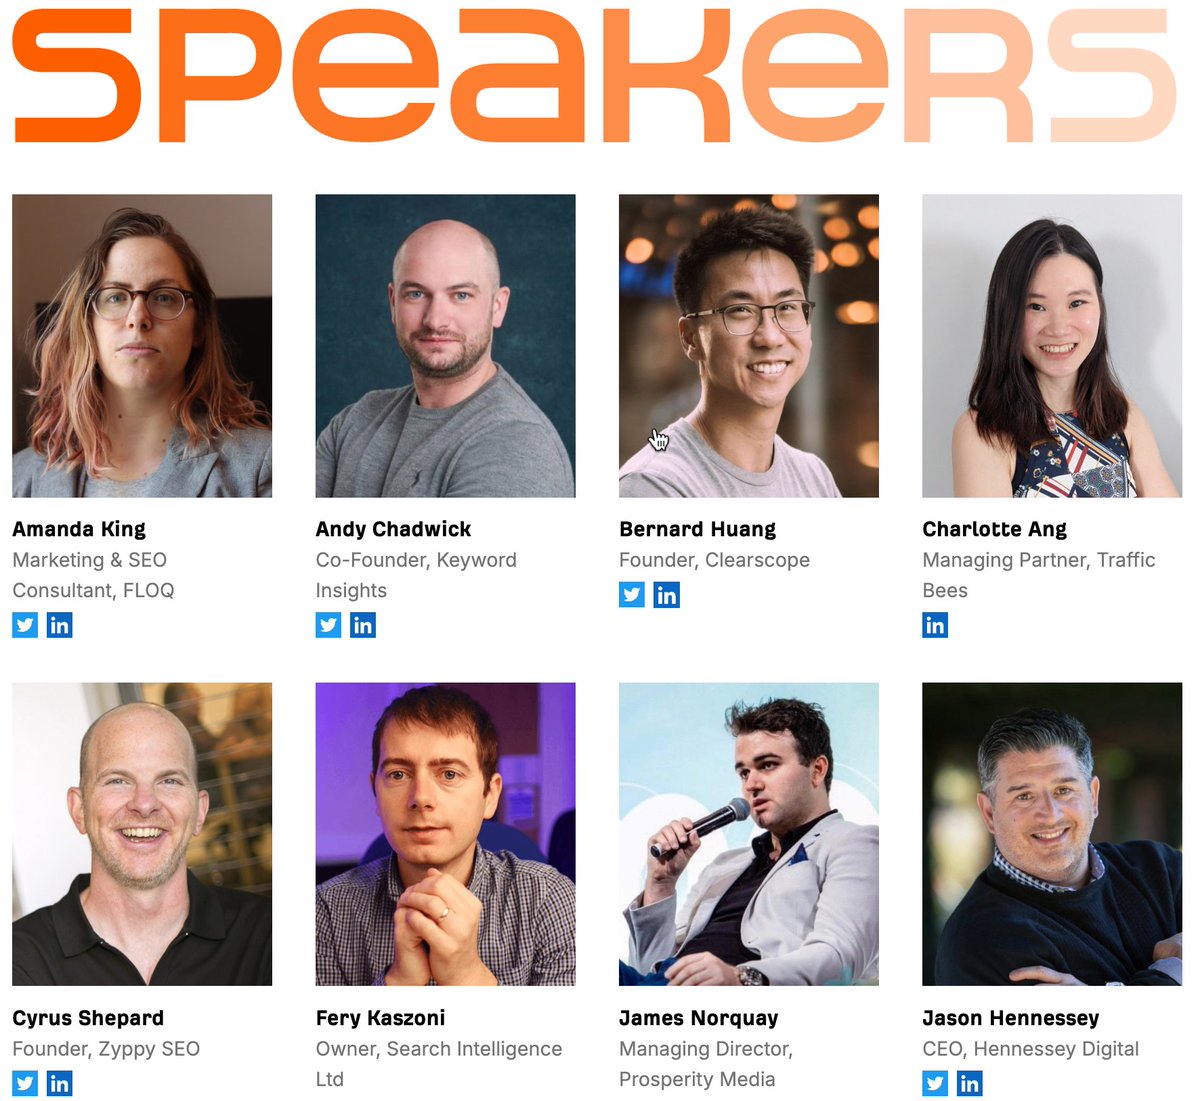 It's happening! 🥳 Ahrefs Evolve Singapore! [24-25 October] ahrefs.com/events/evolve2… We've already confirmed some bad-ass speakers for our event, and that lineup is not even final: 🇦🇺 @amandaecking 🇬🇧 @digitalquokka 🇦🇺 @bernardjhuang 🇺🇸 @CyrusShepard 🇬🇧 @FeryKaszoni 🇦🇺